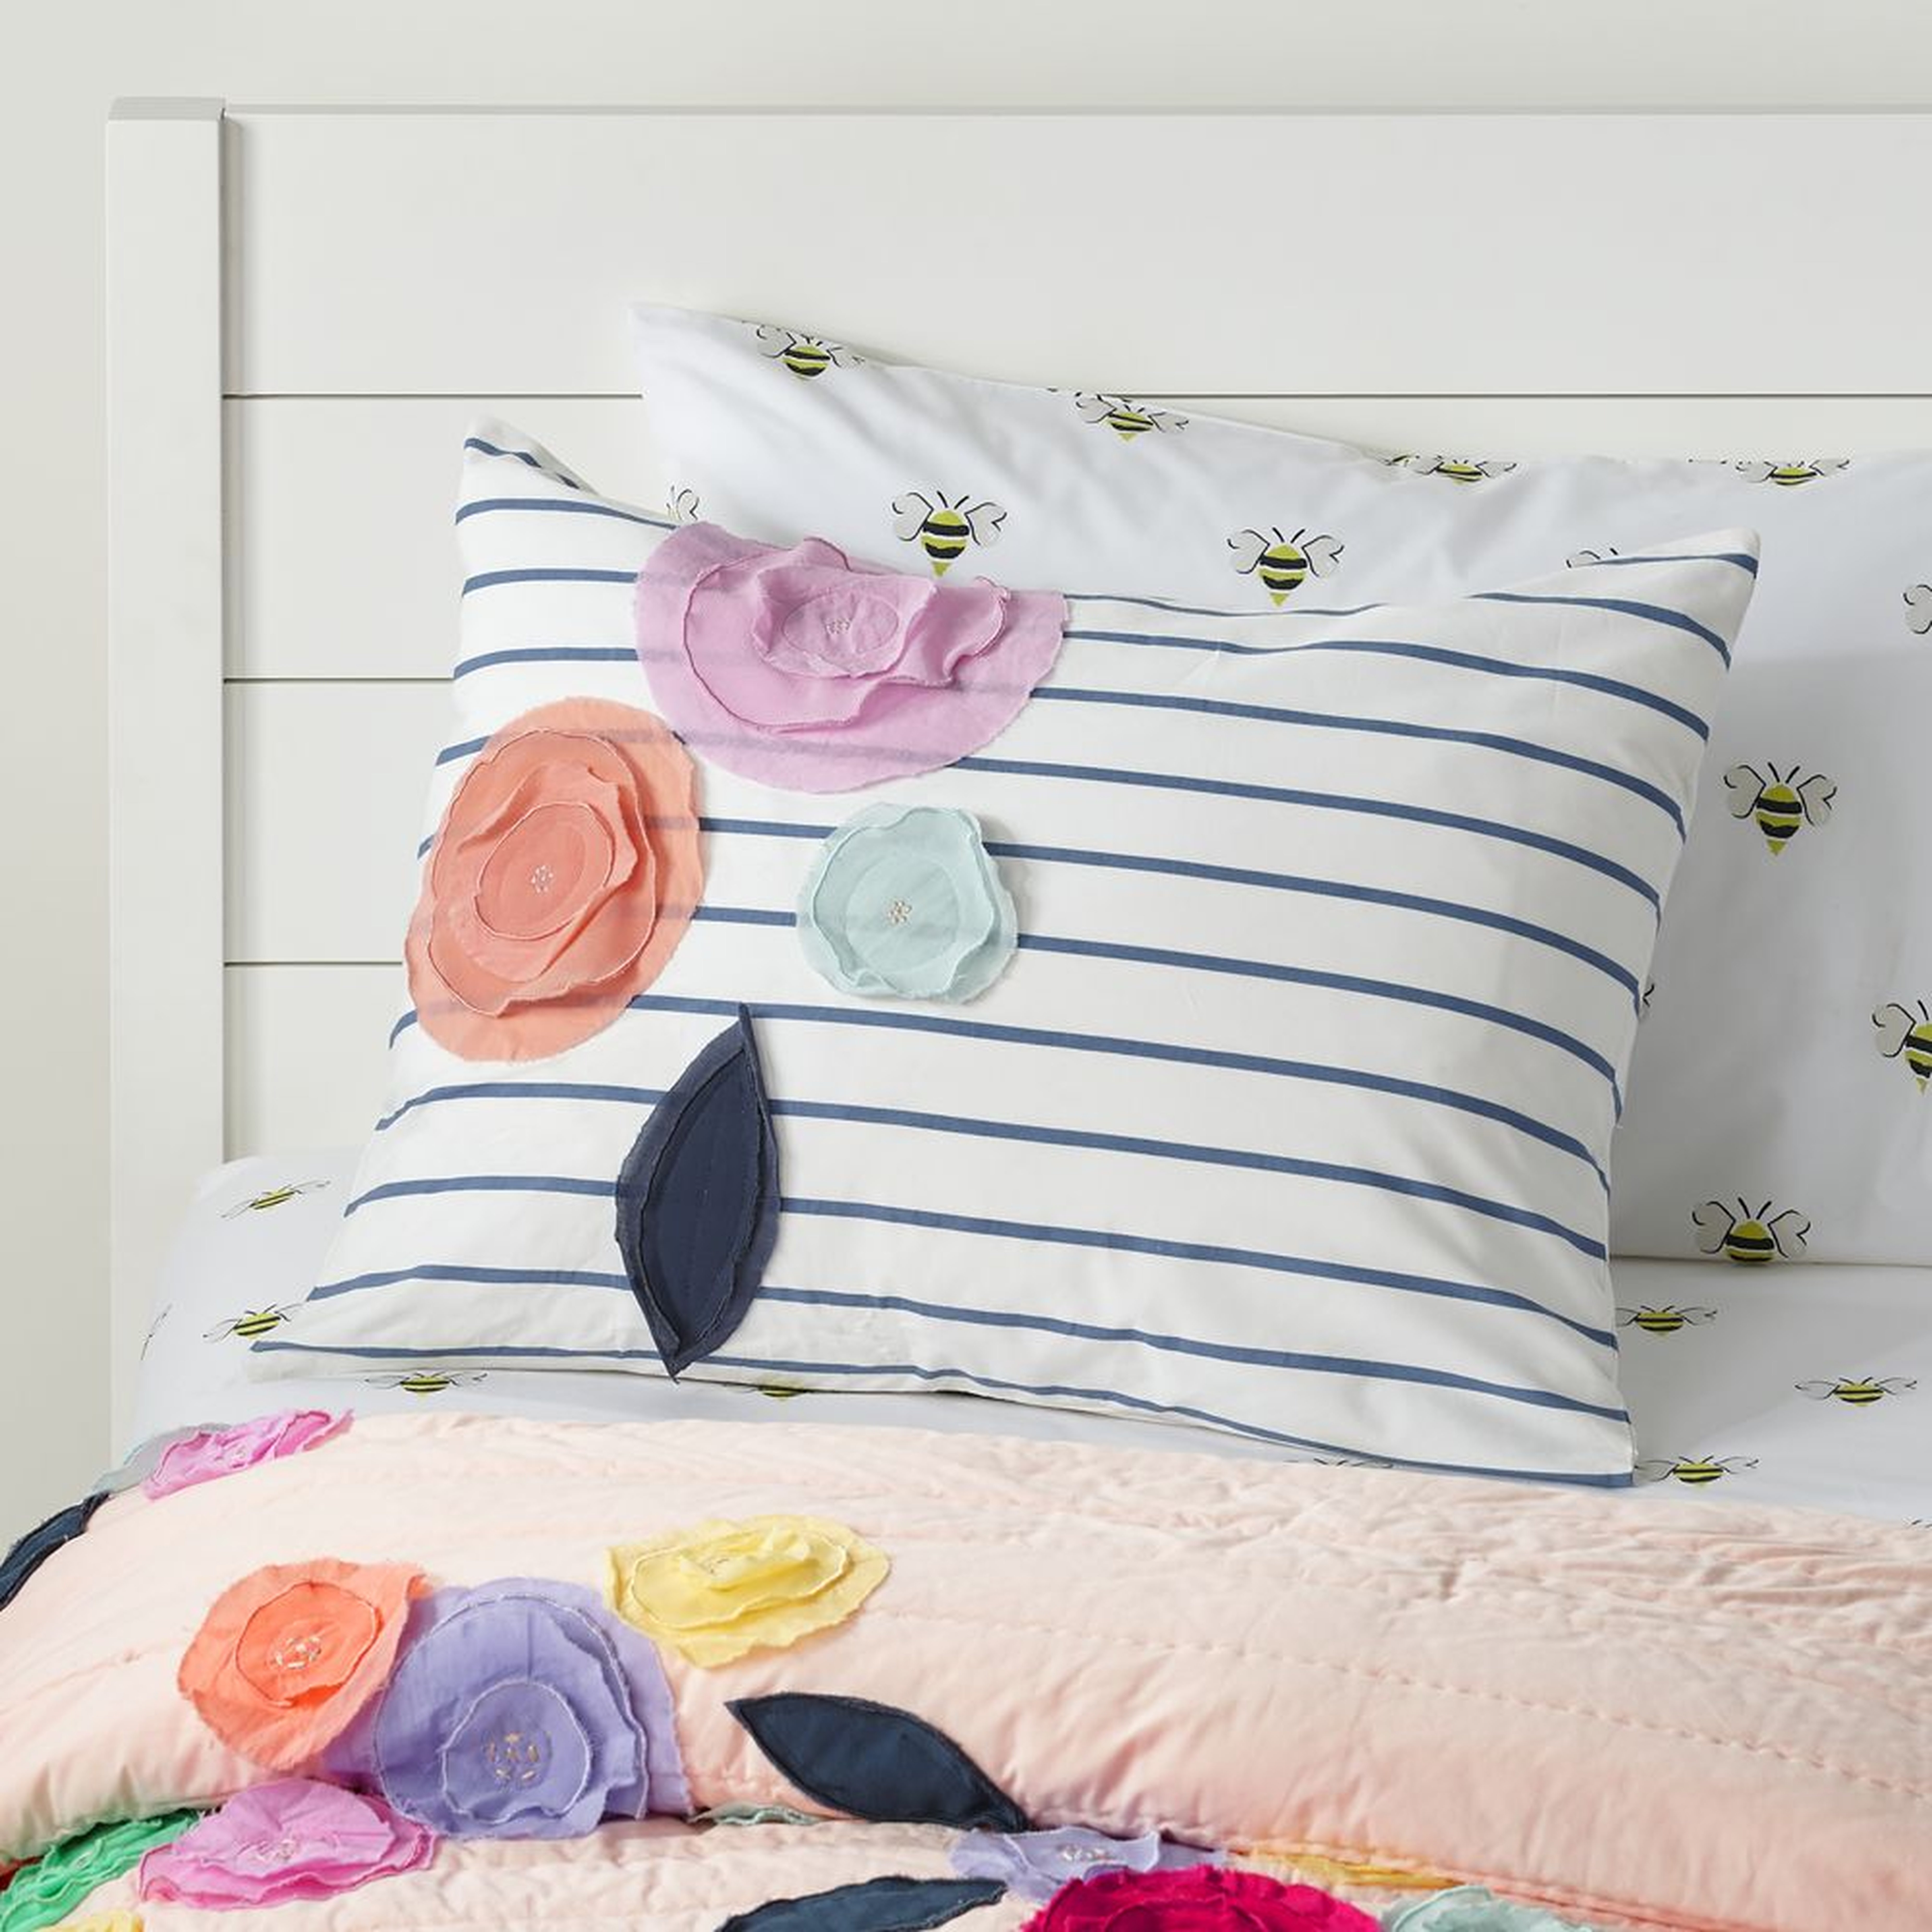 Bee's Knees Floral Applique Sham - Crate and Barrel